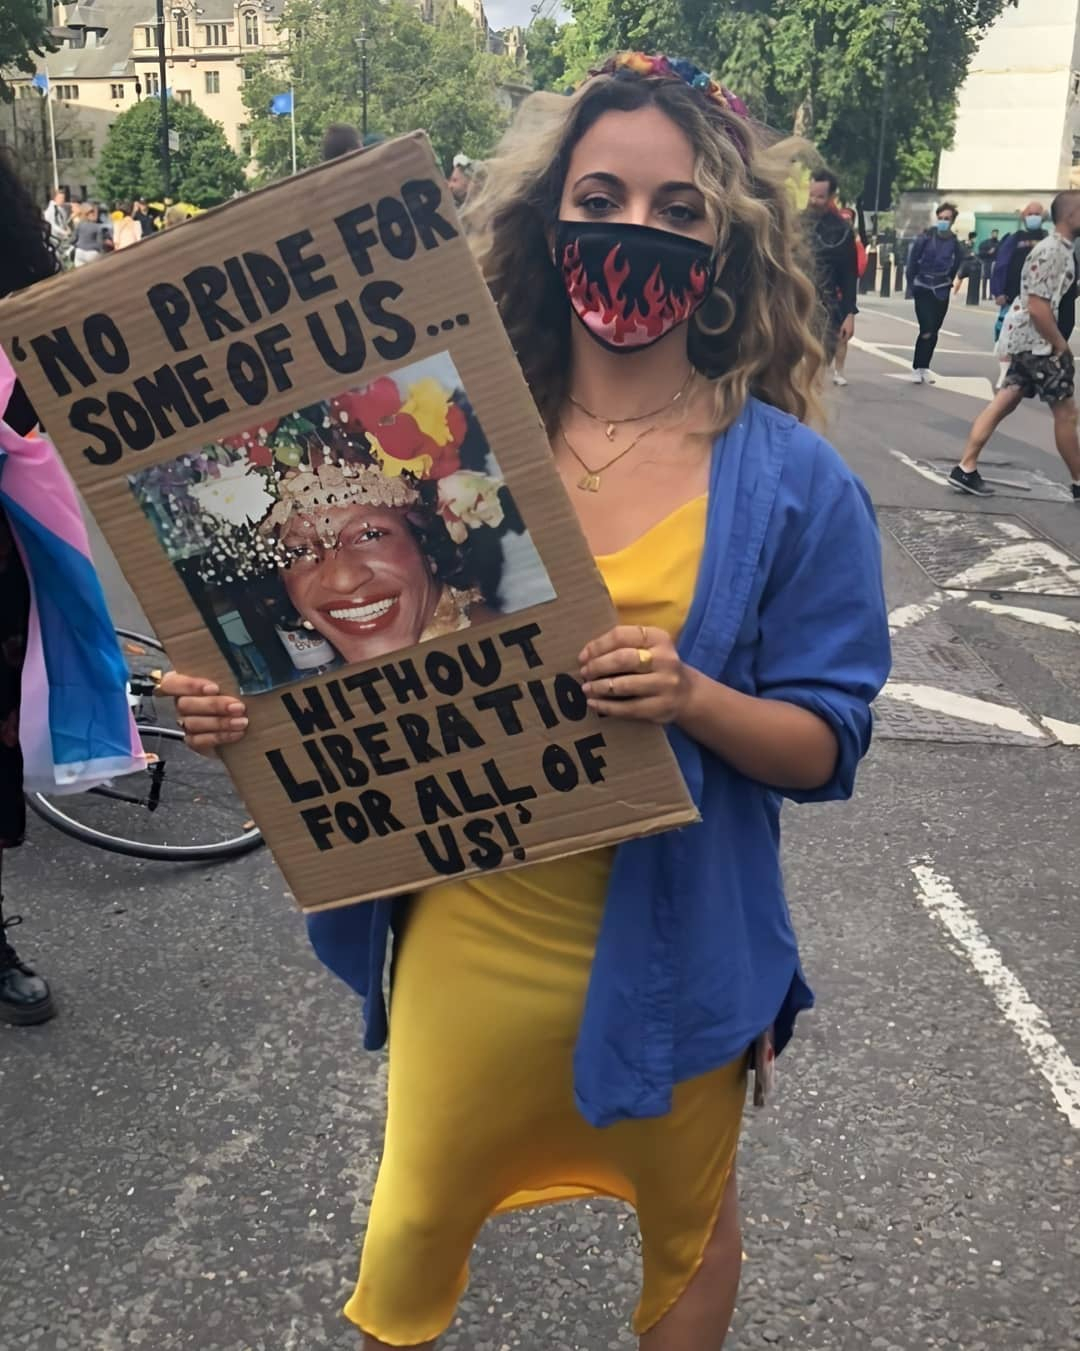 Jade holds up a placard during the London protest in June